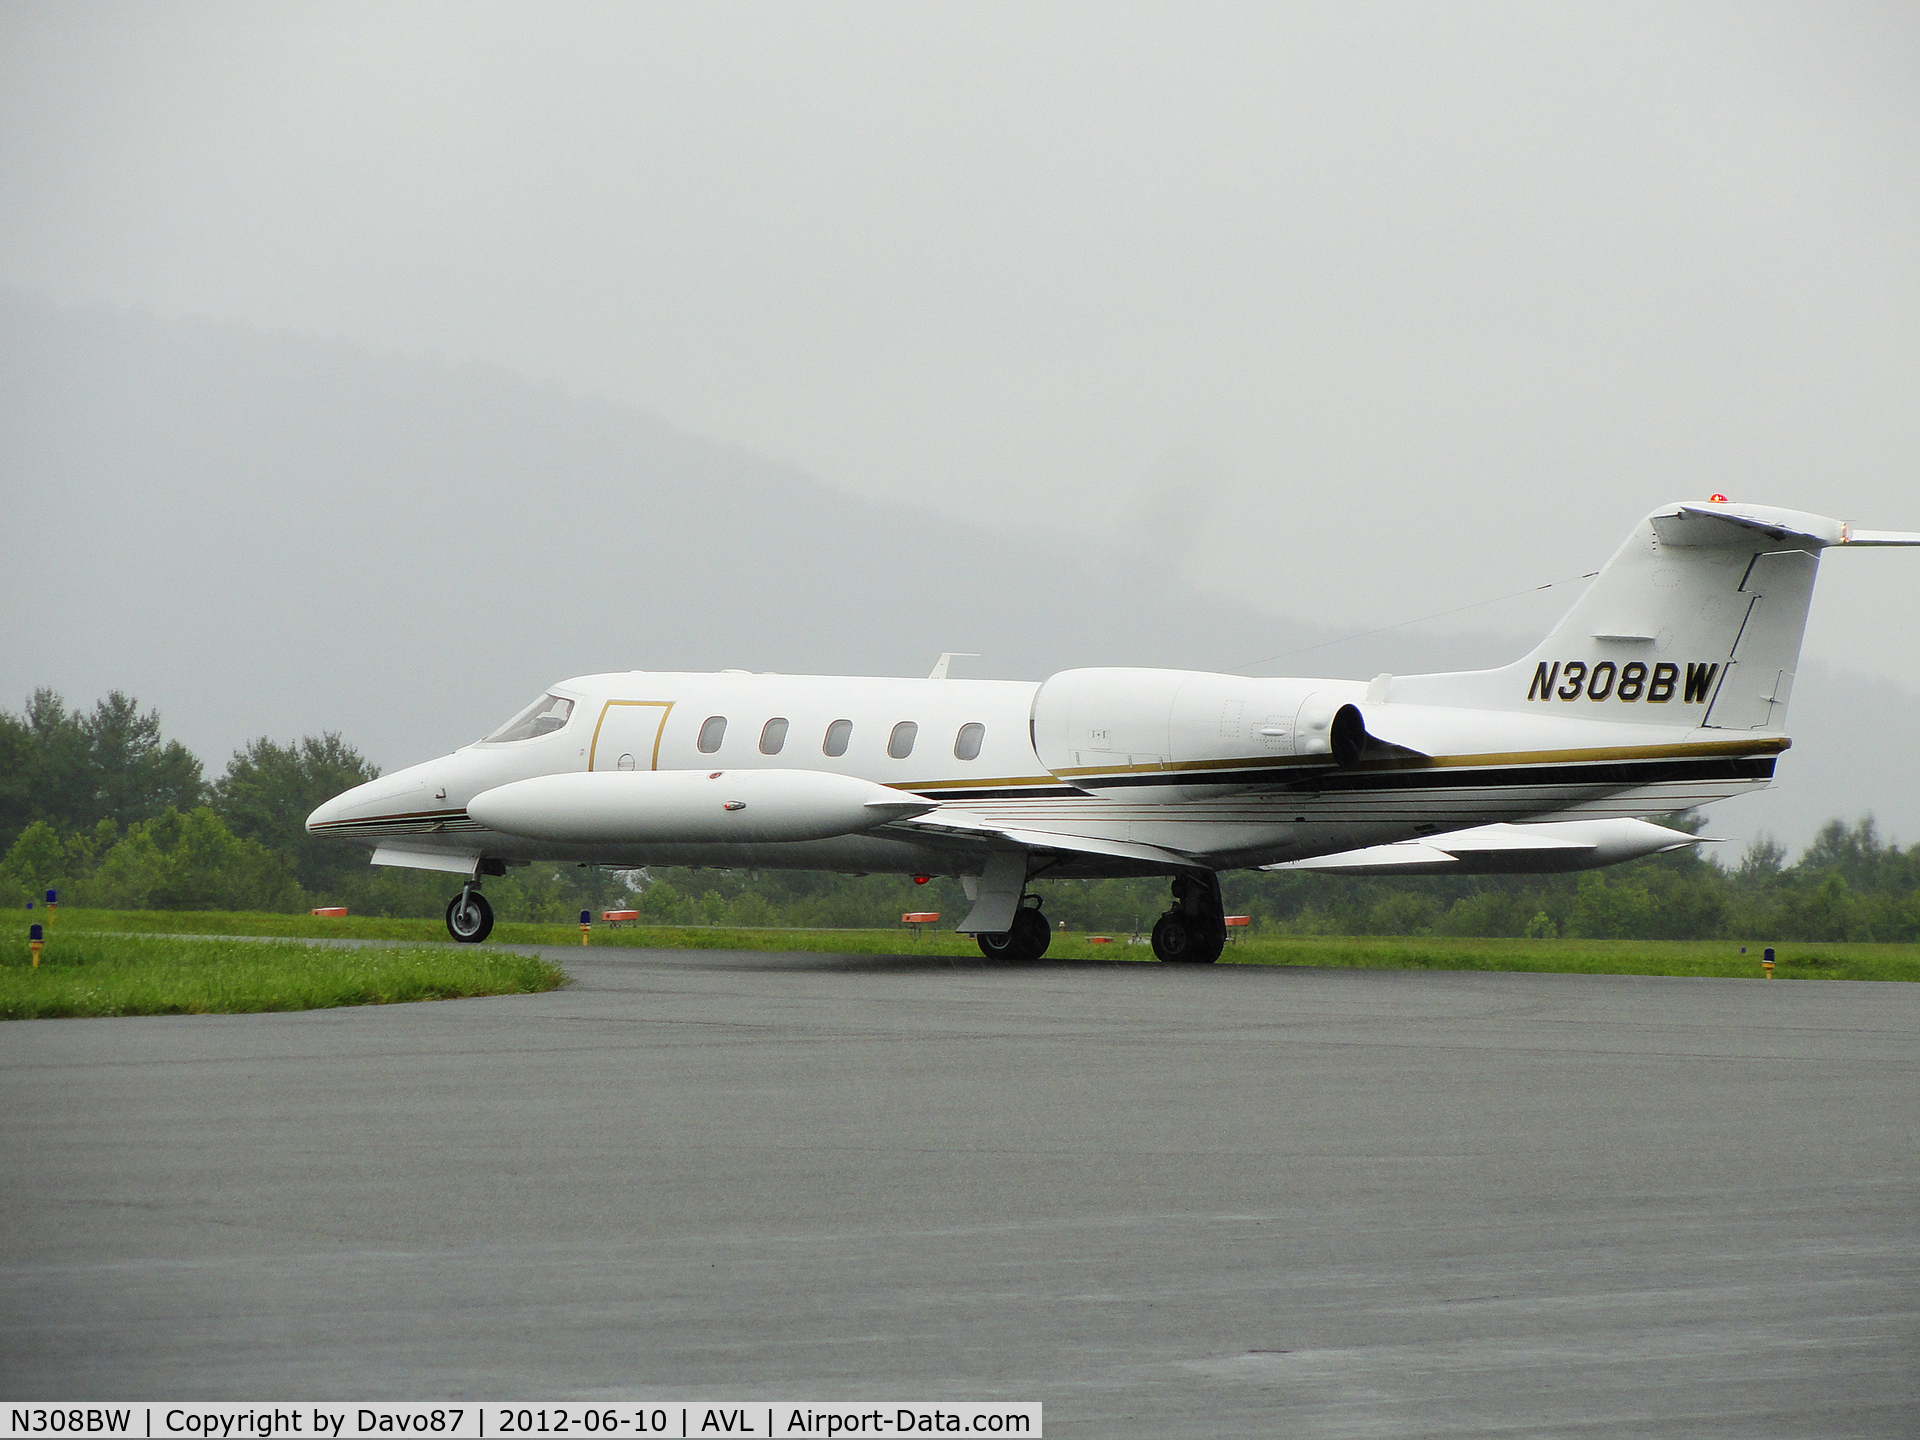 N308BW, 1981 Gates Learjet 35A C/N 438, Photo taken in the rain at Asheville Airport on June 10, 2012.